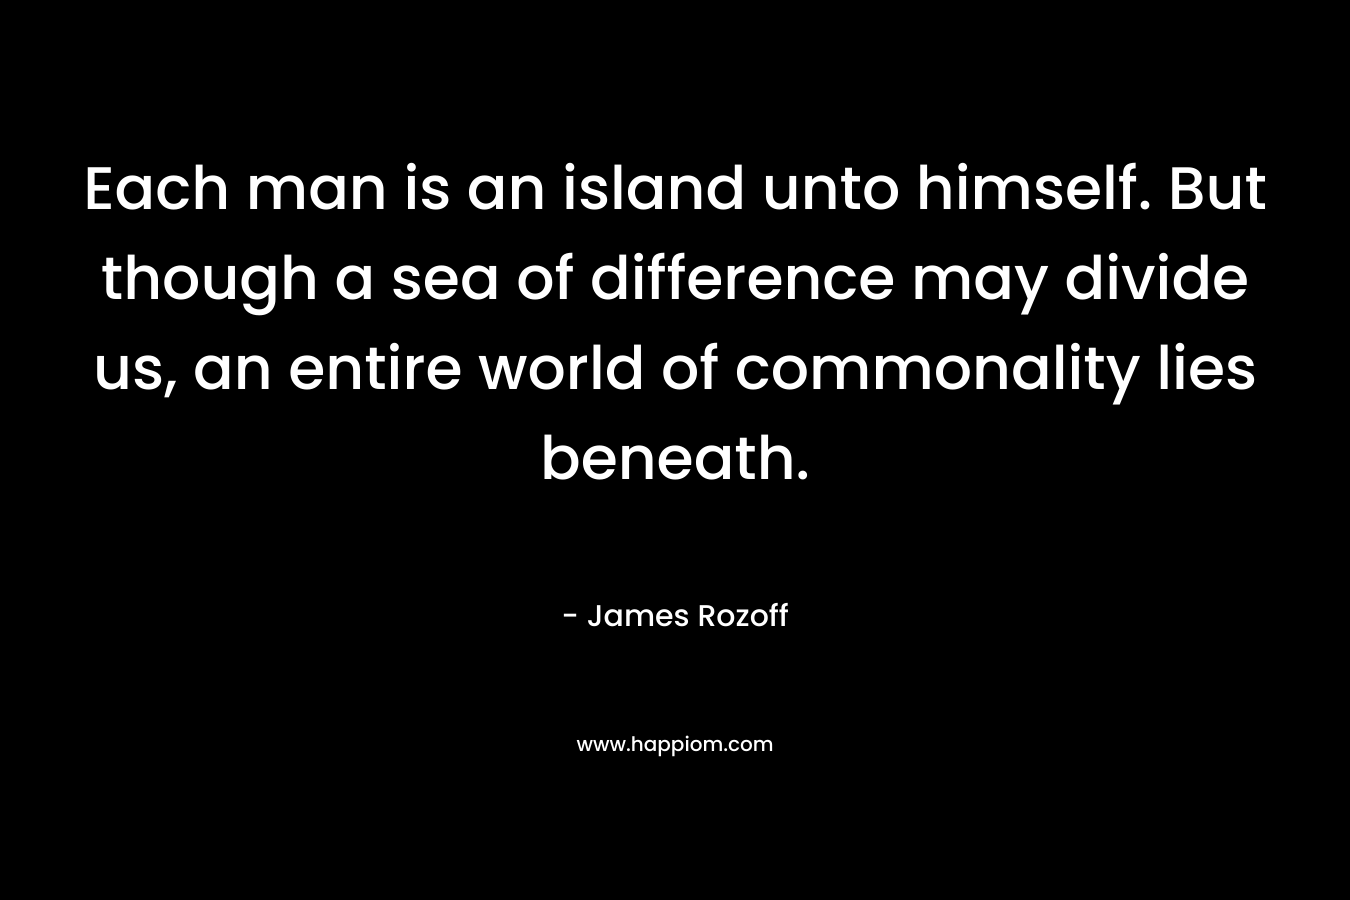 Each man is an island unto himself. But though a sea of difference may divide us, an entire world of commonality lies beneath. – James Rozoff